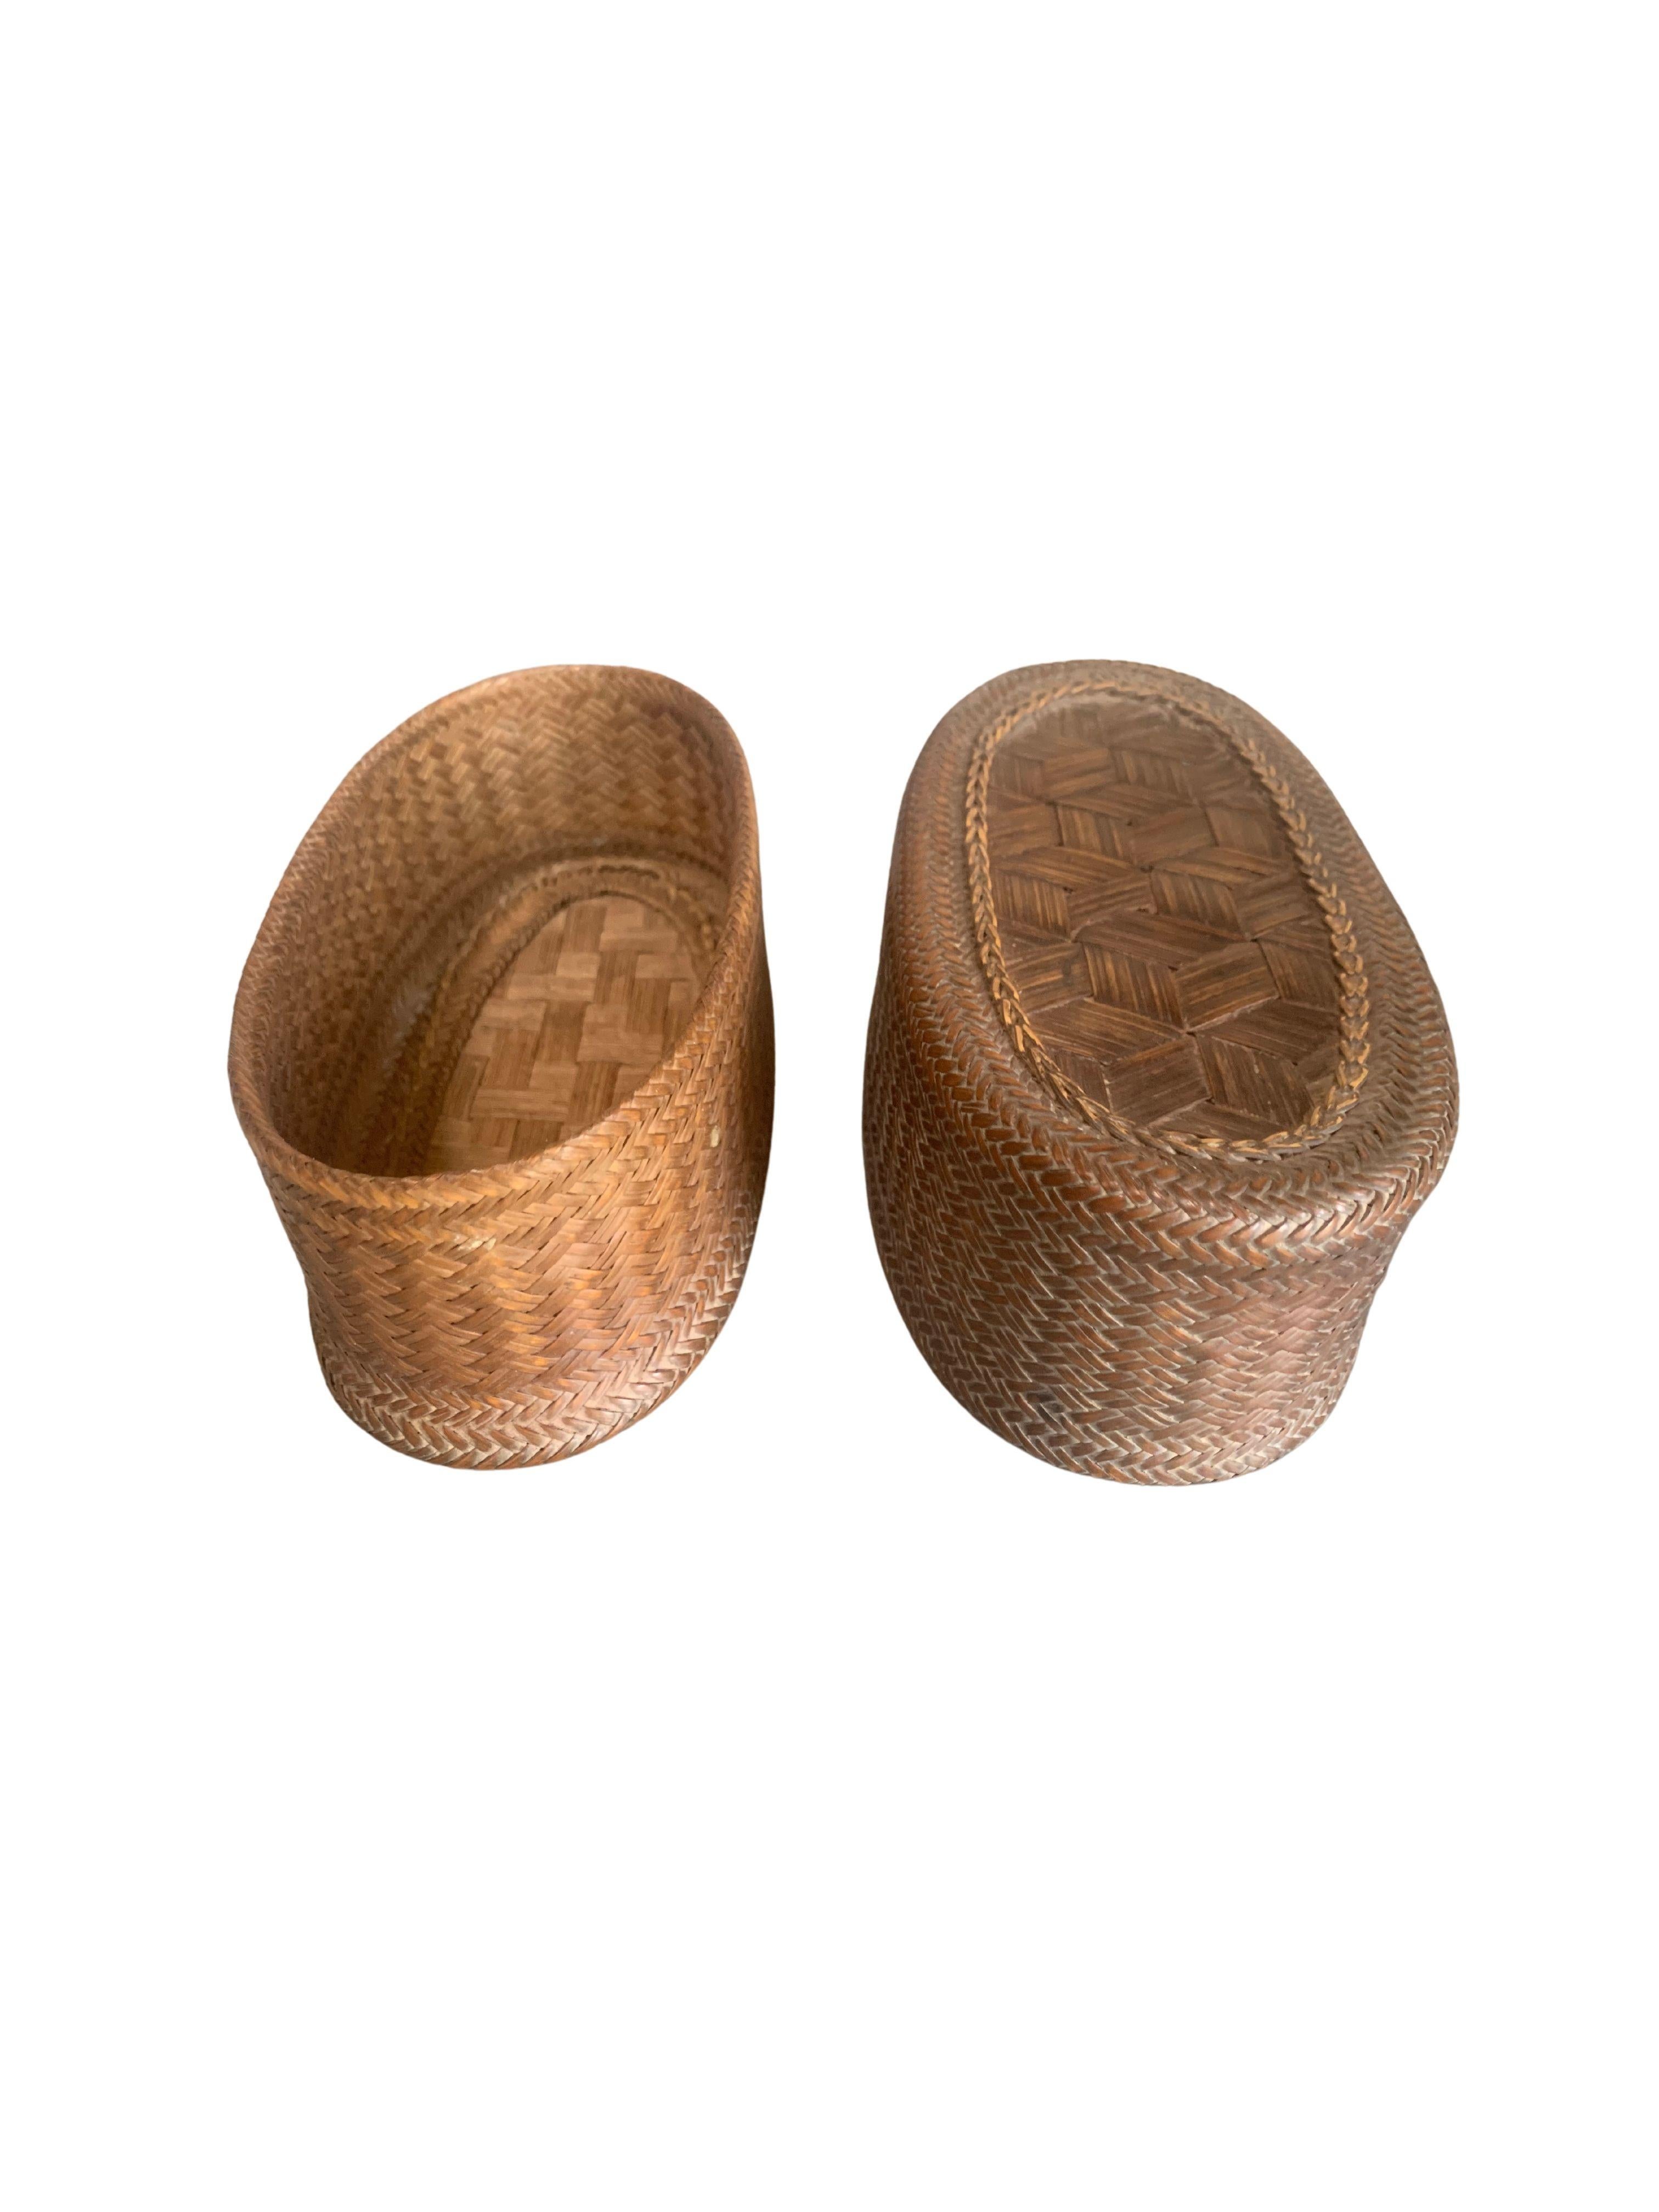 Hand-Woven Rattan Spice Basket from Akha Tribe of Northern Thailand For Sale